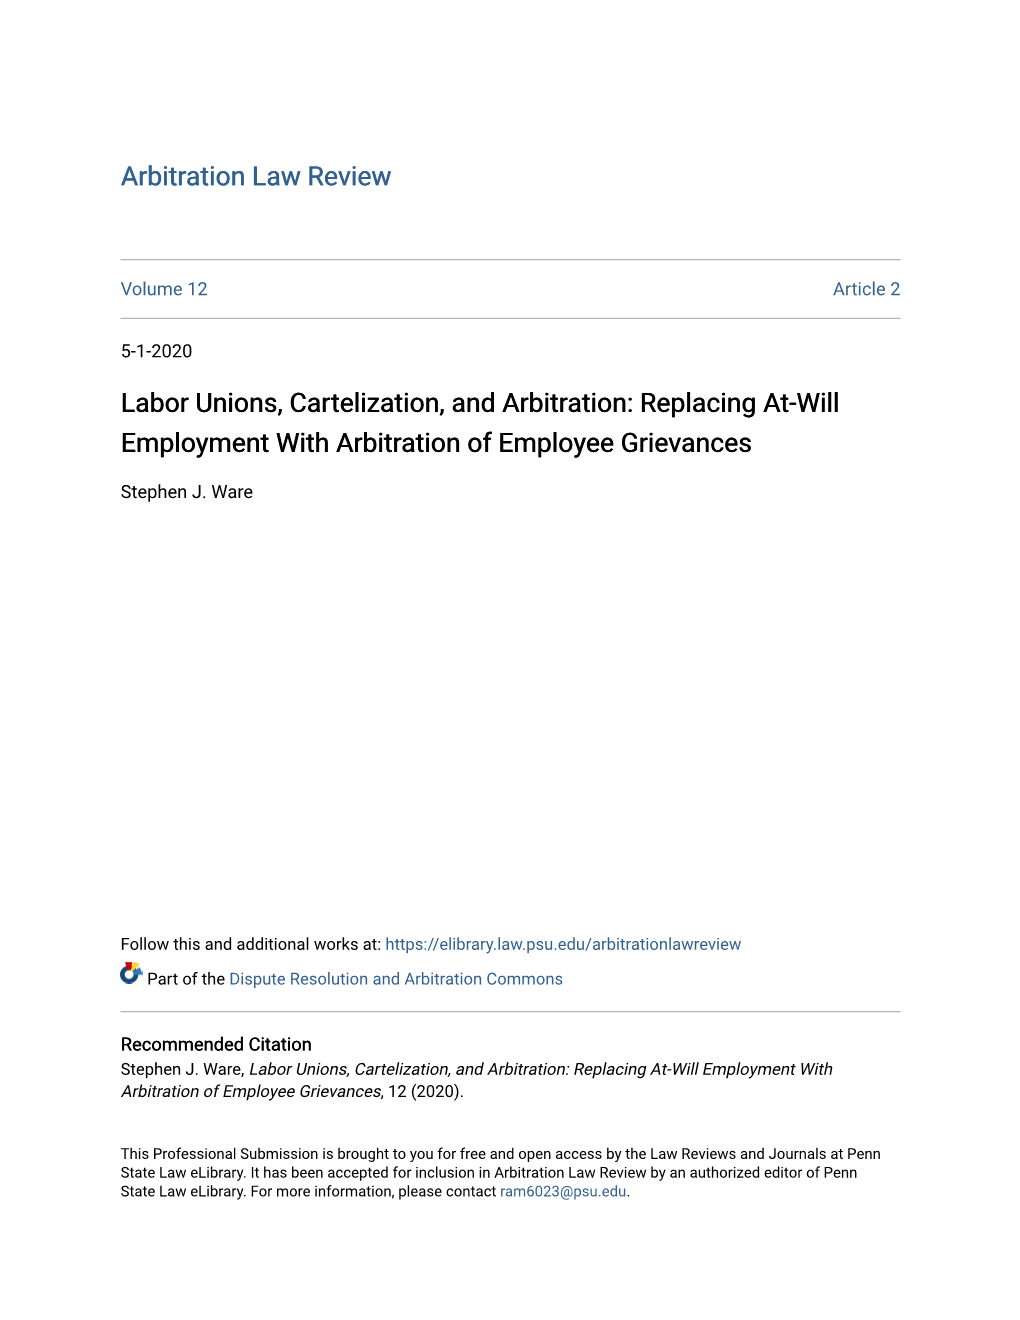 Labor Unions, Cartelization, and Arbitration: Replacing At-Will Employment with Arbitration of Employee Grievances